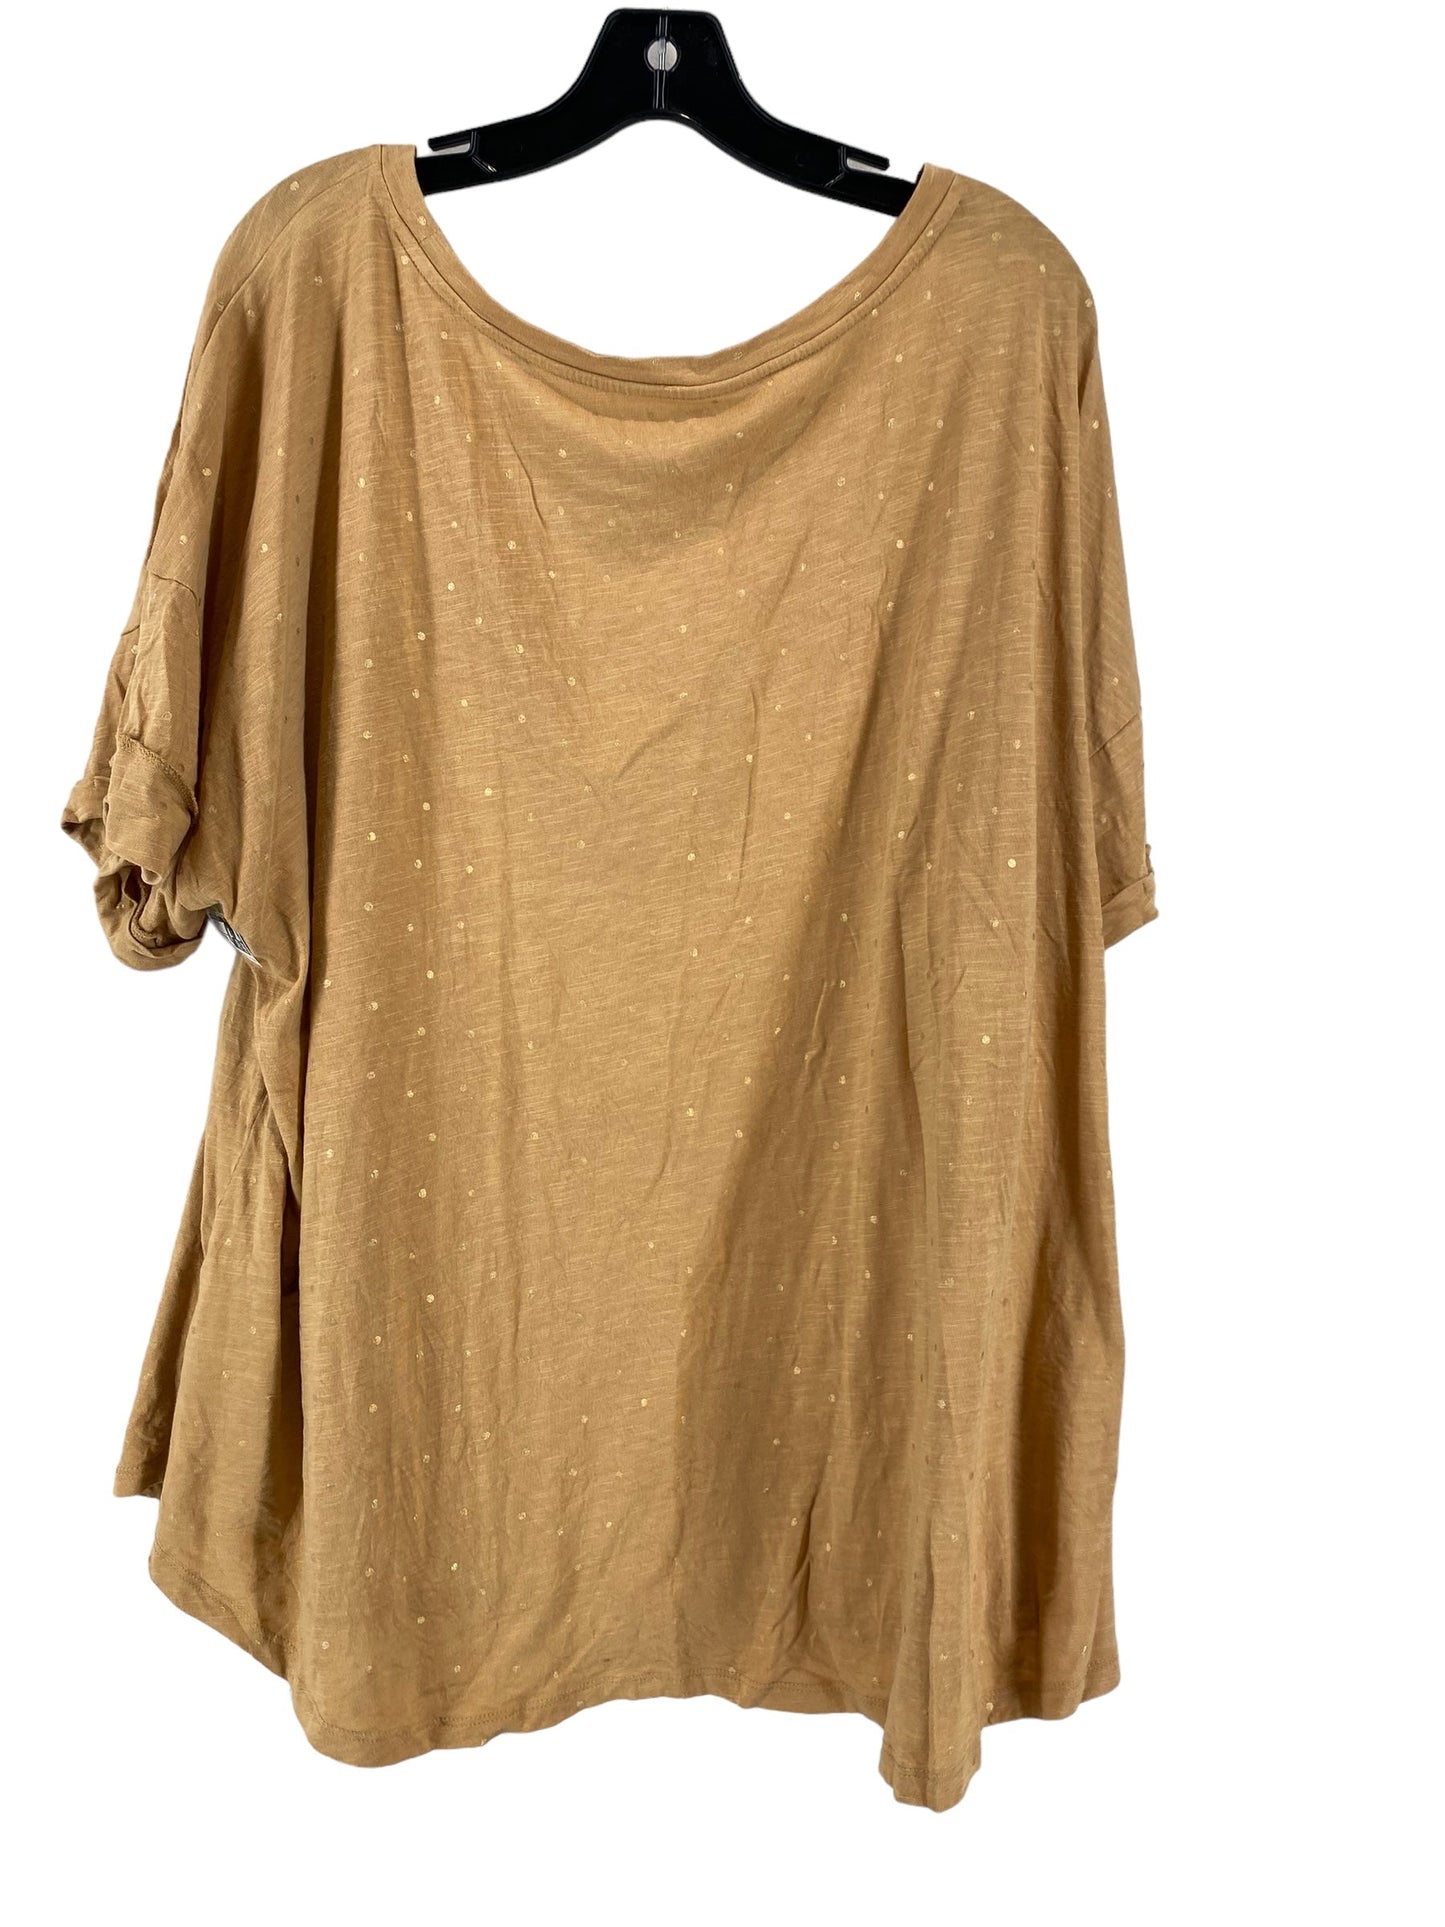 Tan Top Short Sleeve Maurices, Size 3x